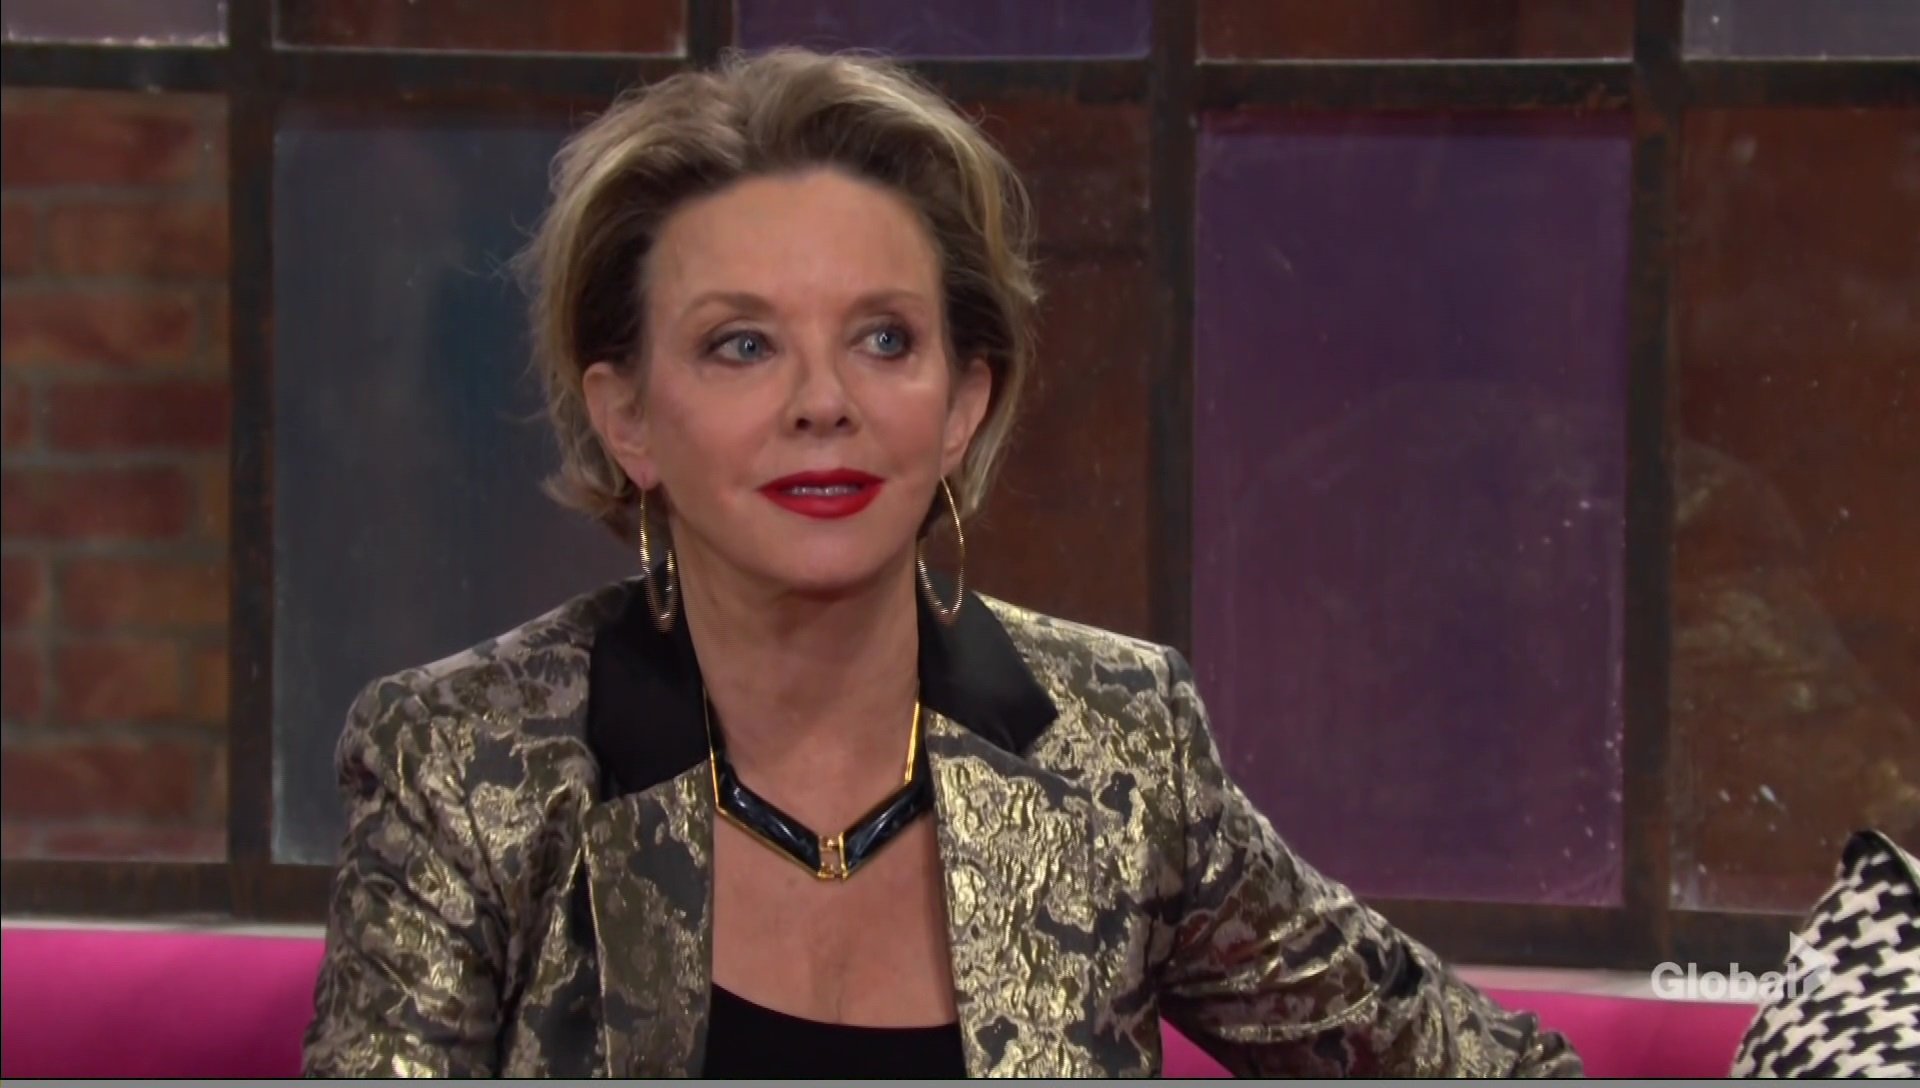 judith chapman returns to young restless gloria fisher Y&R spoiler recaps comings and goings